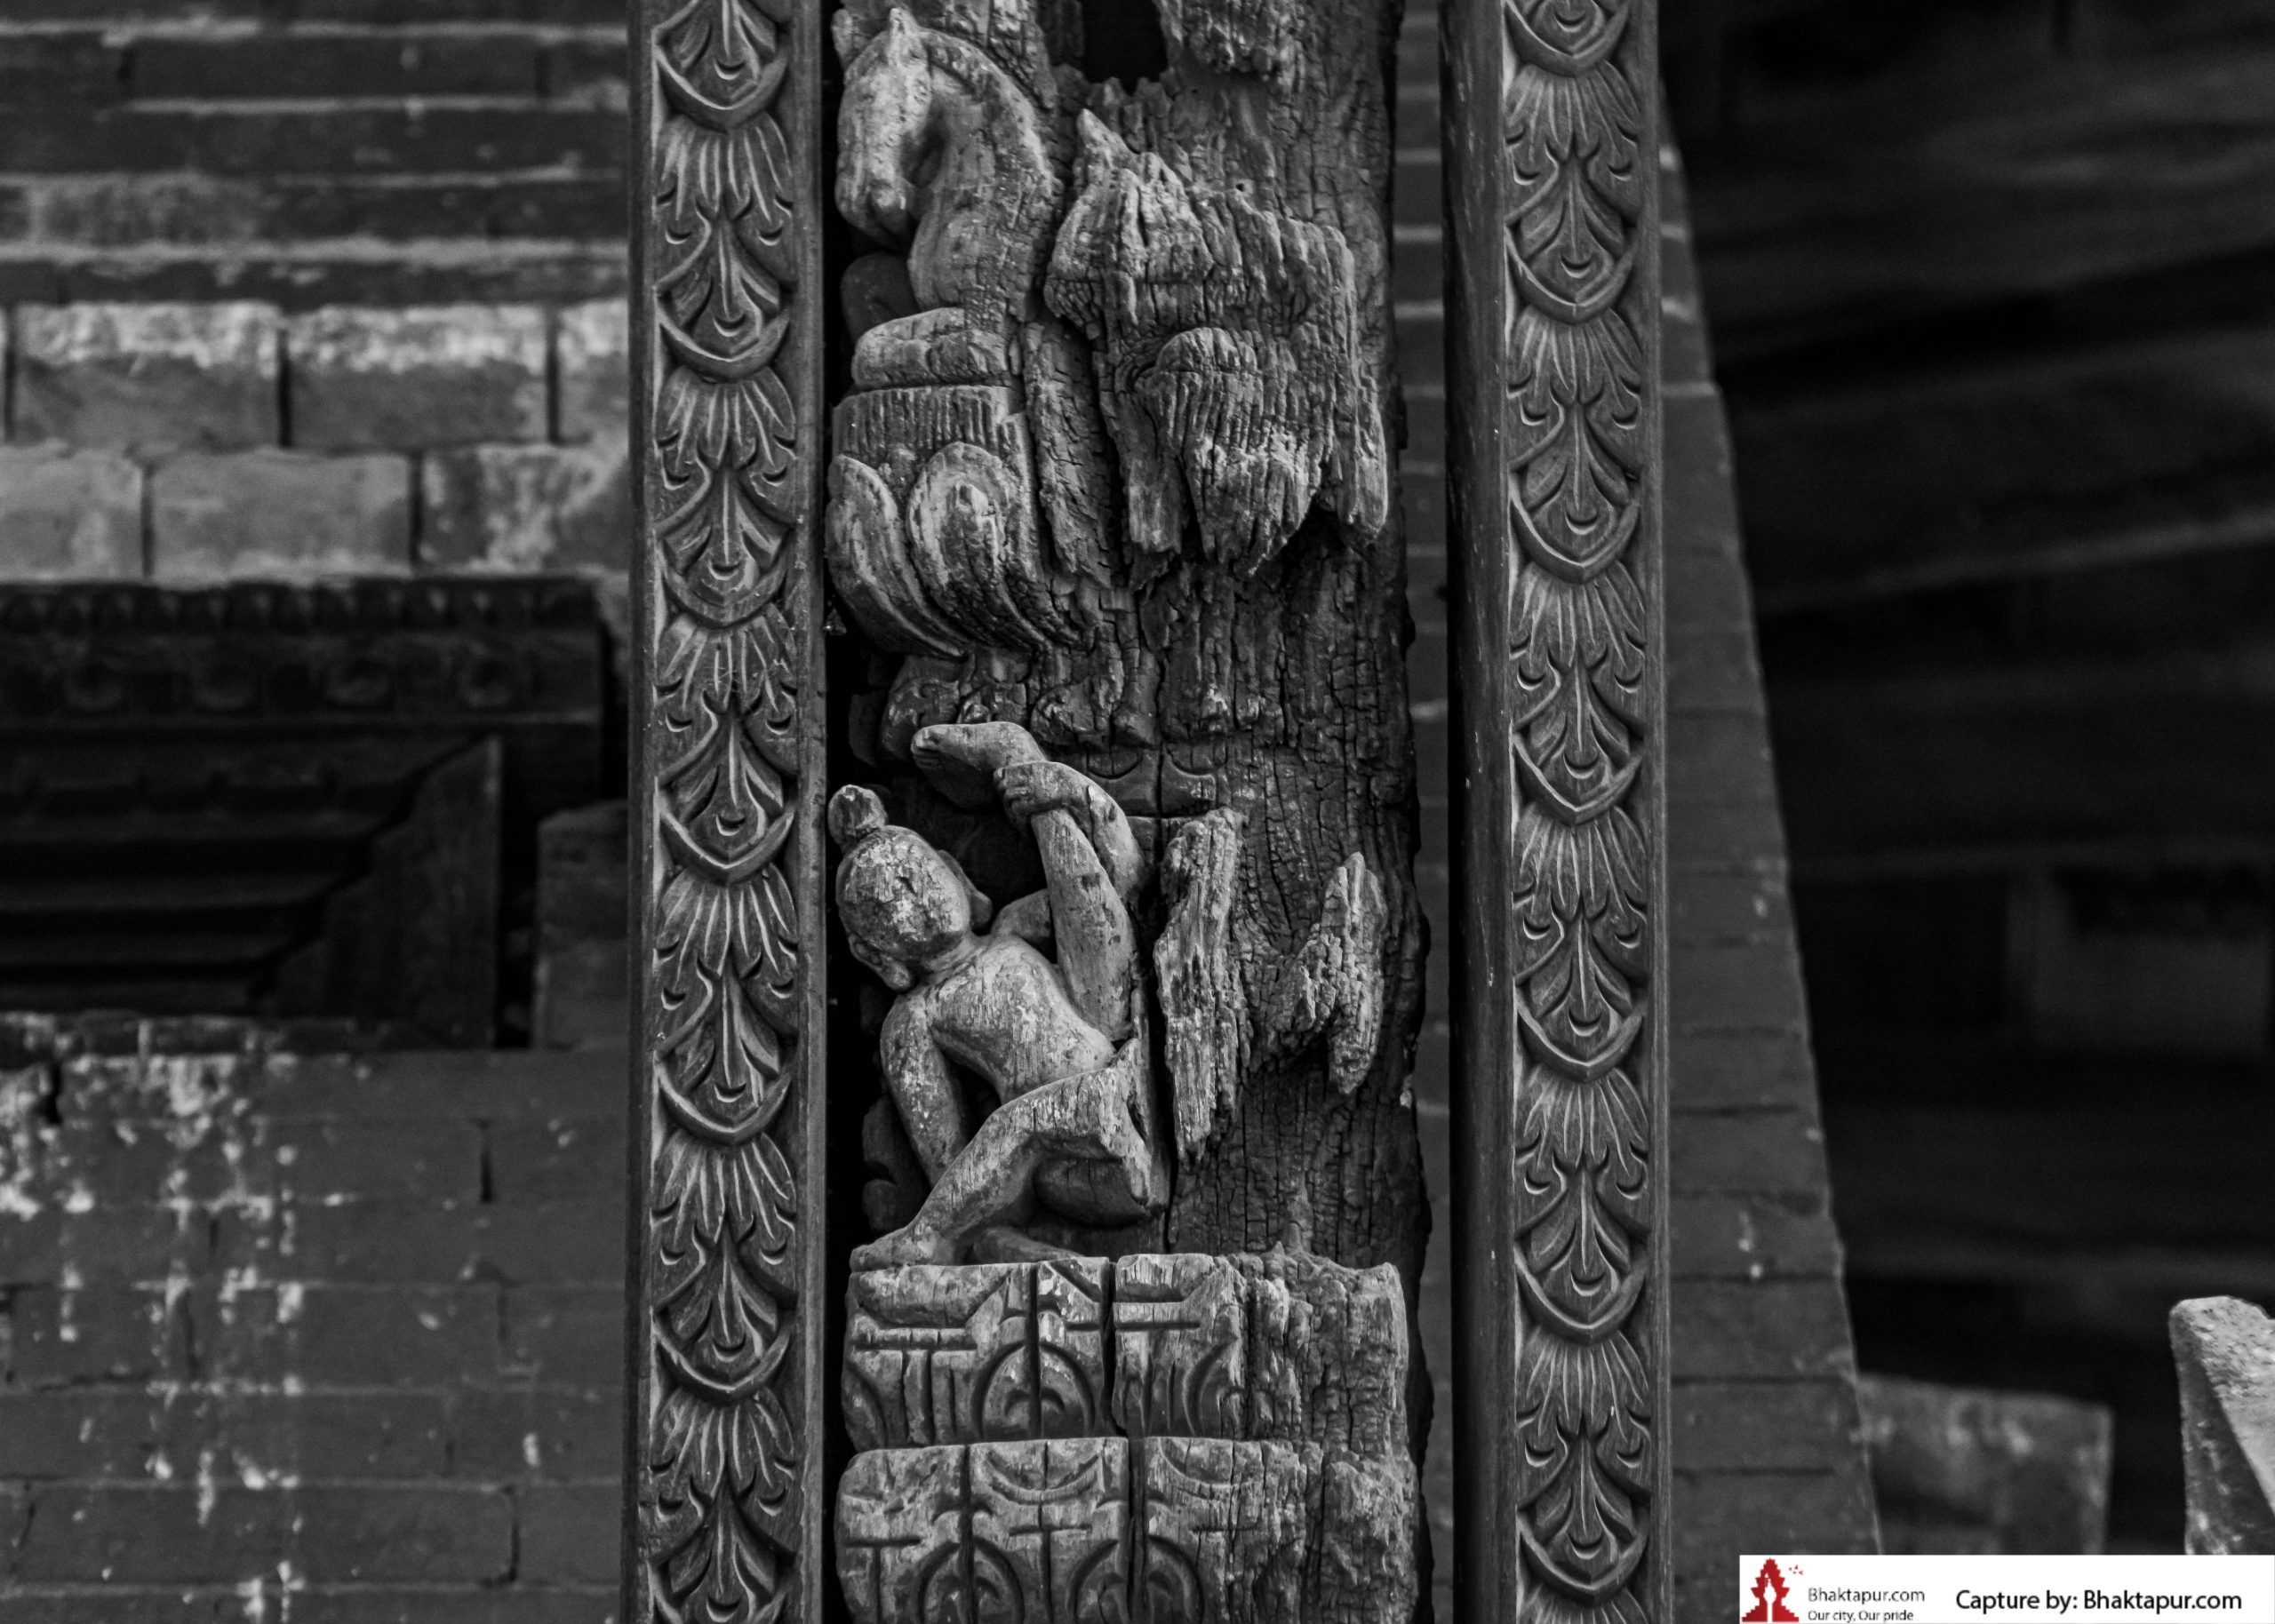 https://www.bhaktapur.com/wp-content/uploads/2021/08/erotic-carving-104-of-137-scaled.jpg